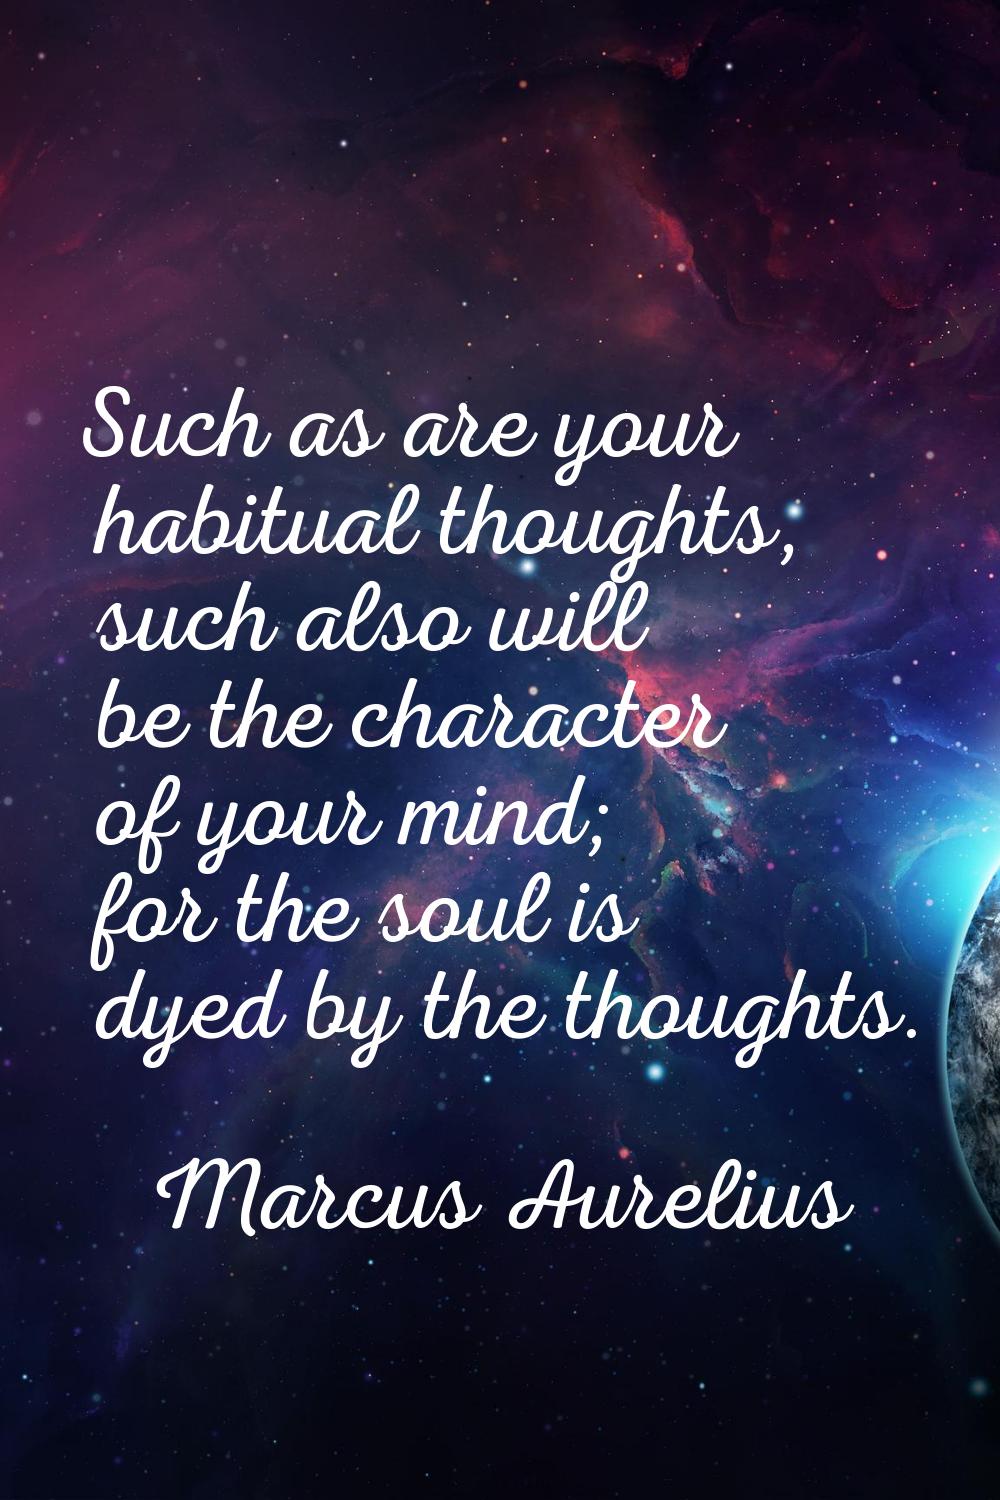 Such as are your habitual thoughts, such also will be the character of your mind; for the soul is d